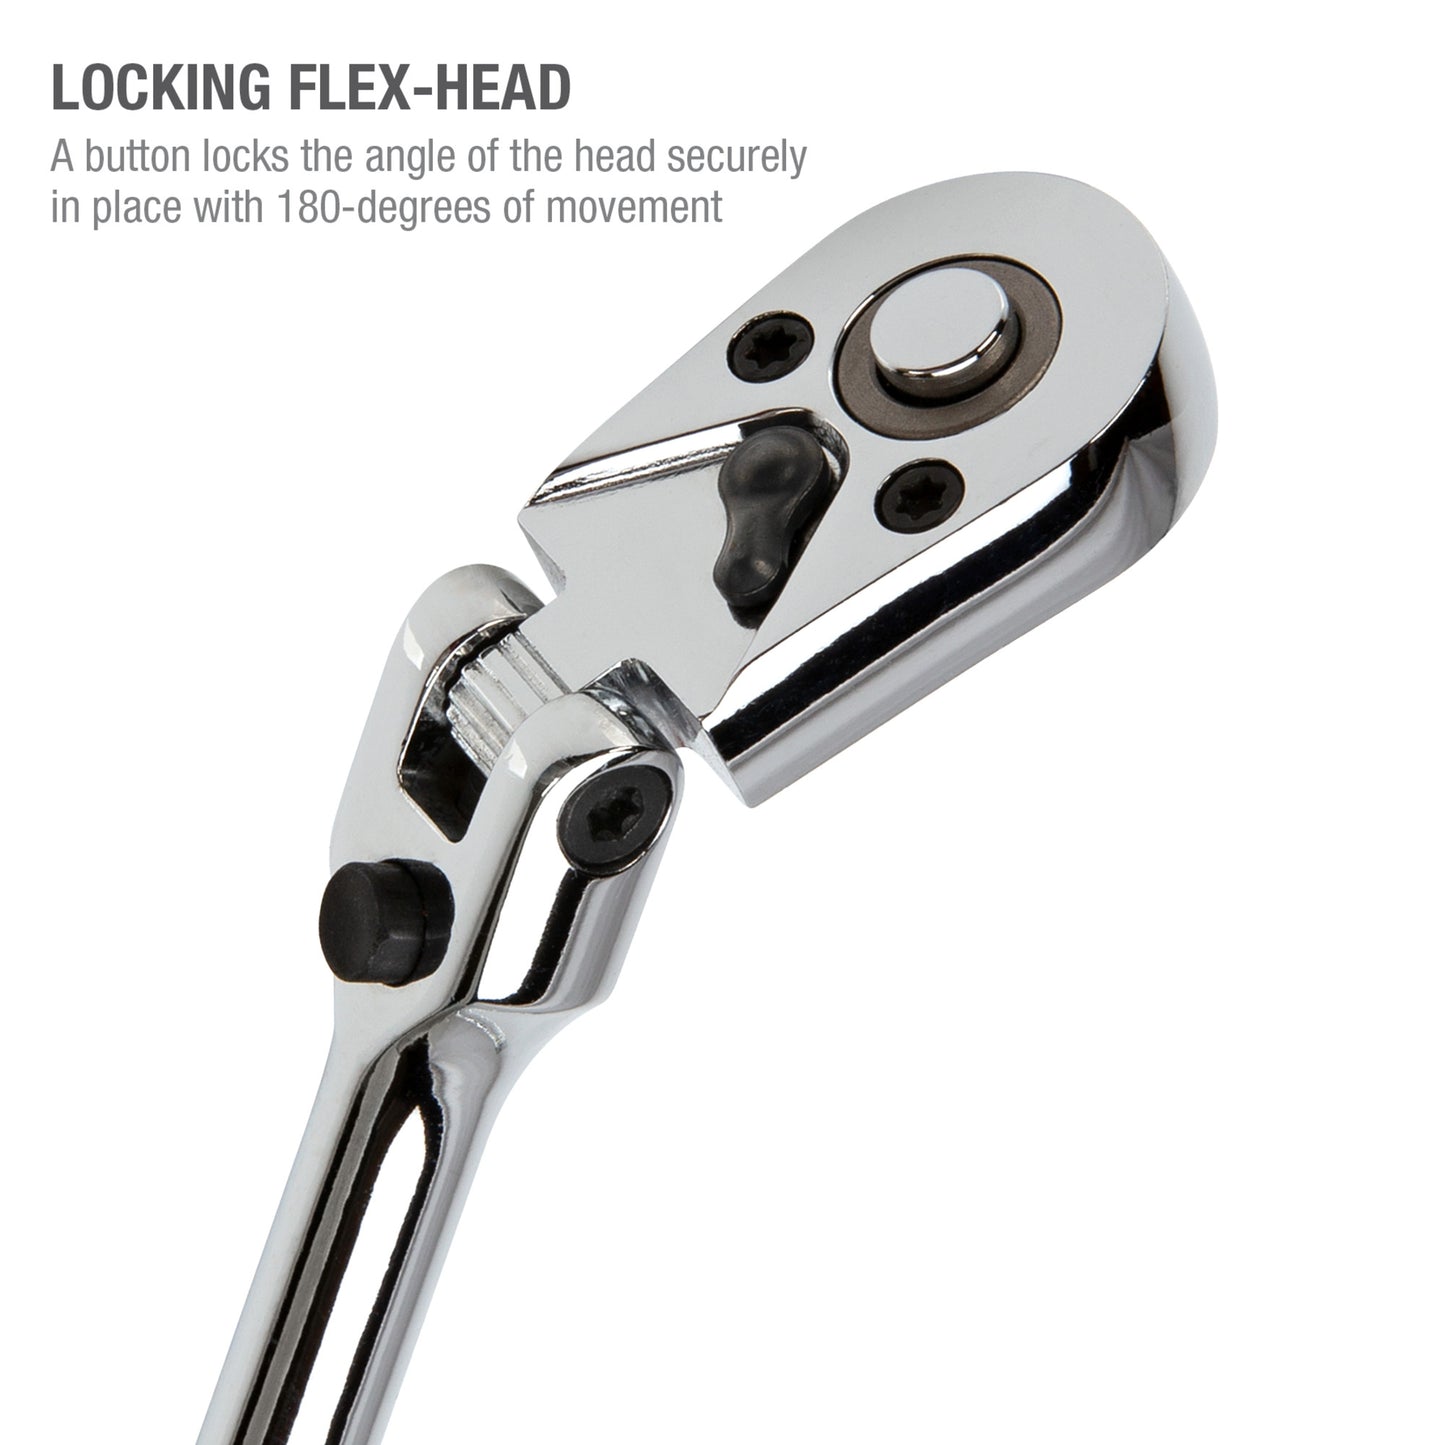 3/8-Inch Drive 72-Tooth 180-Degree Flex-Head Reversible Quick-Release Ratchet with 18-Inch Long Full Polish Handle